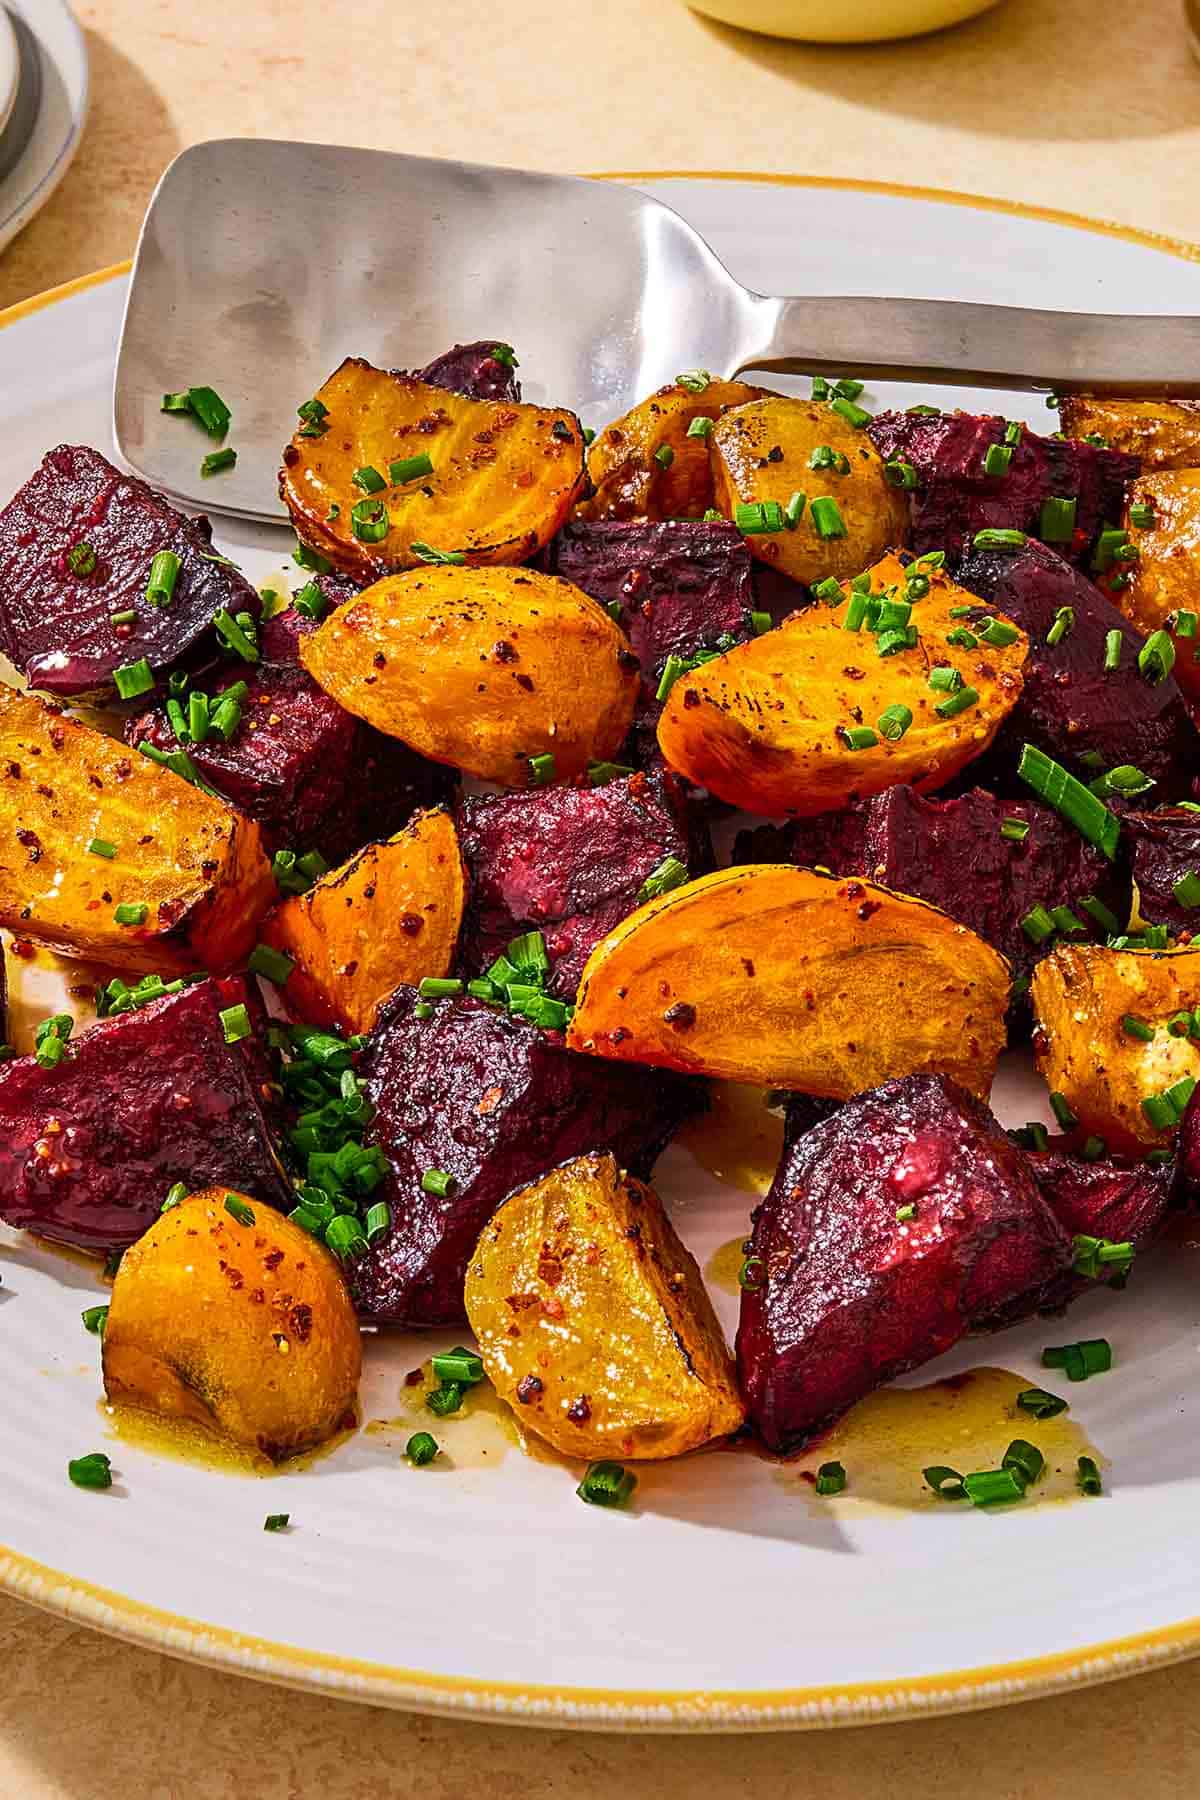 A close up of roasted beets on a platter, topped with chives and a drizzle of apple cider vinaigrette with a serving spoon.